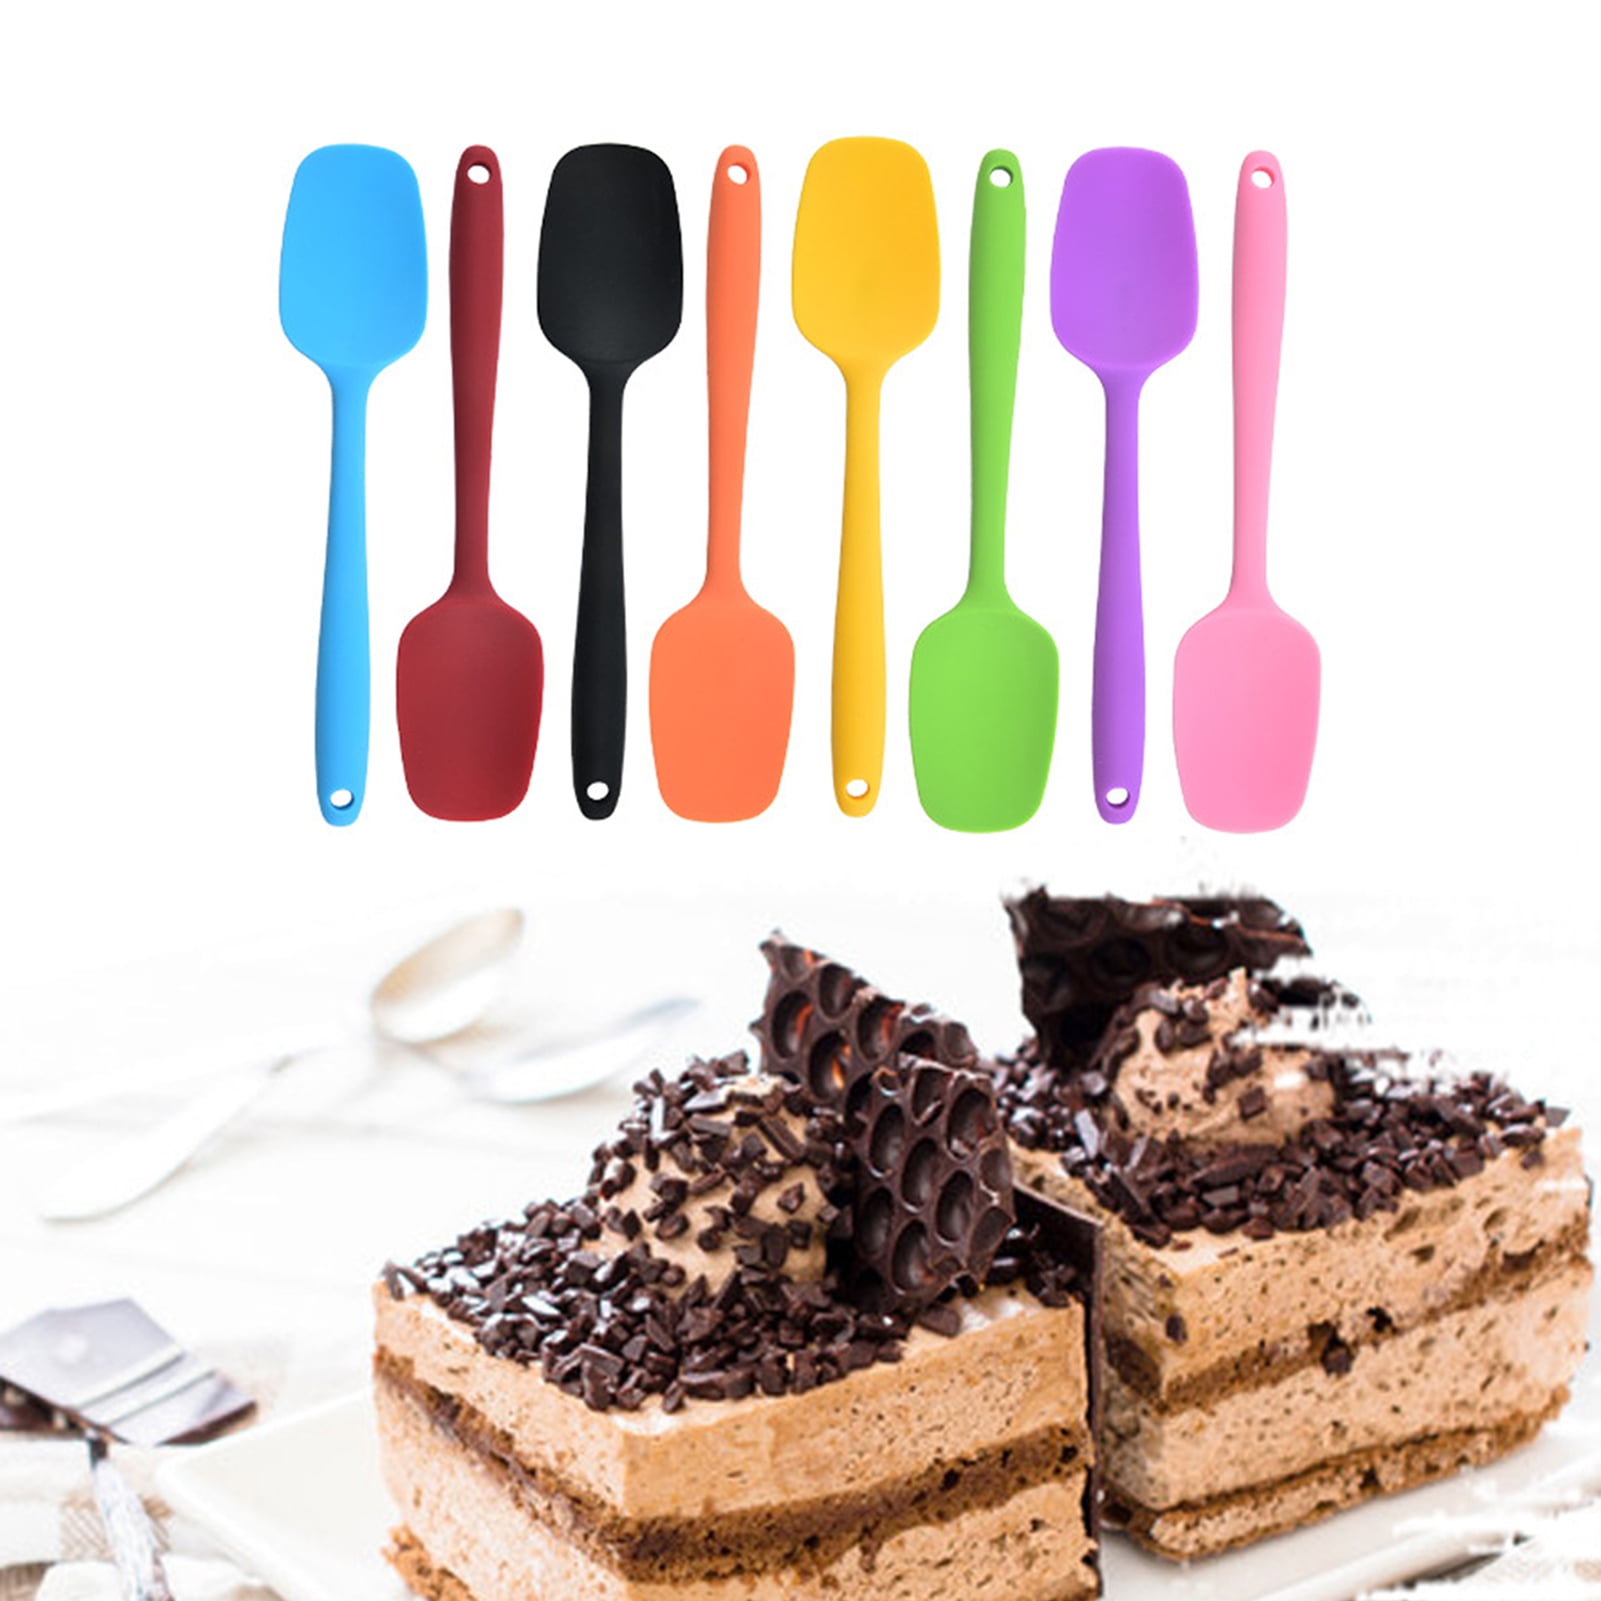 WALFOS Cake Butter Spatula Silicone Spoon Mixing Spoon Long